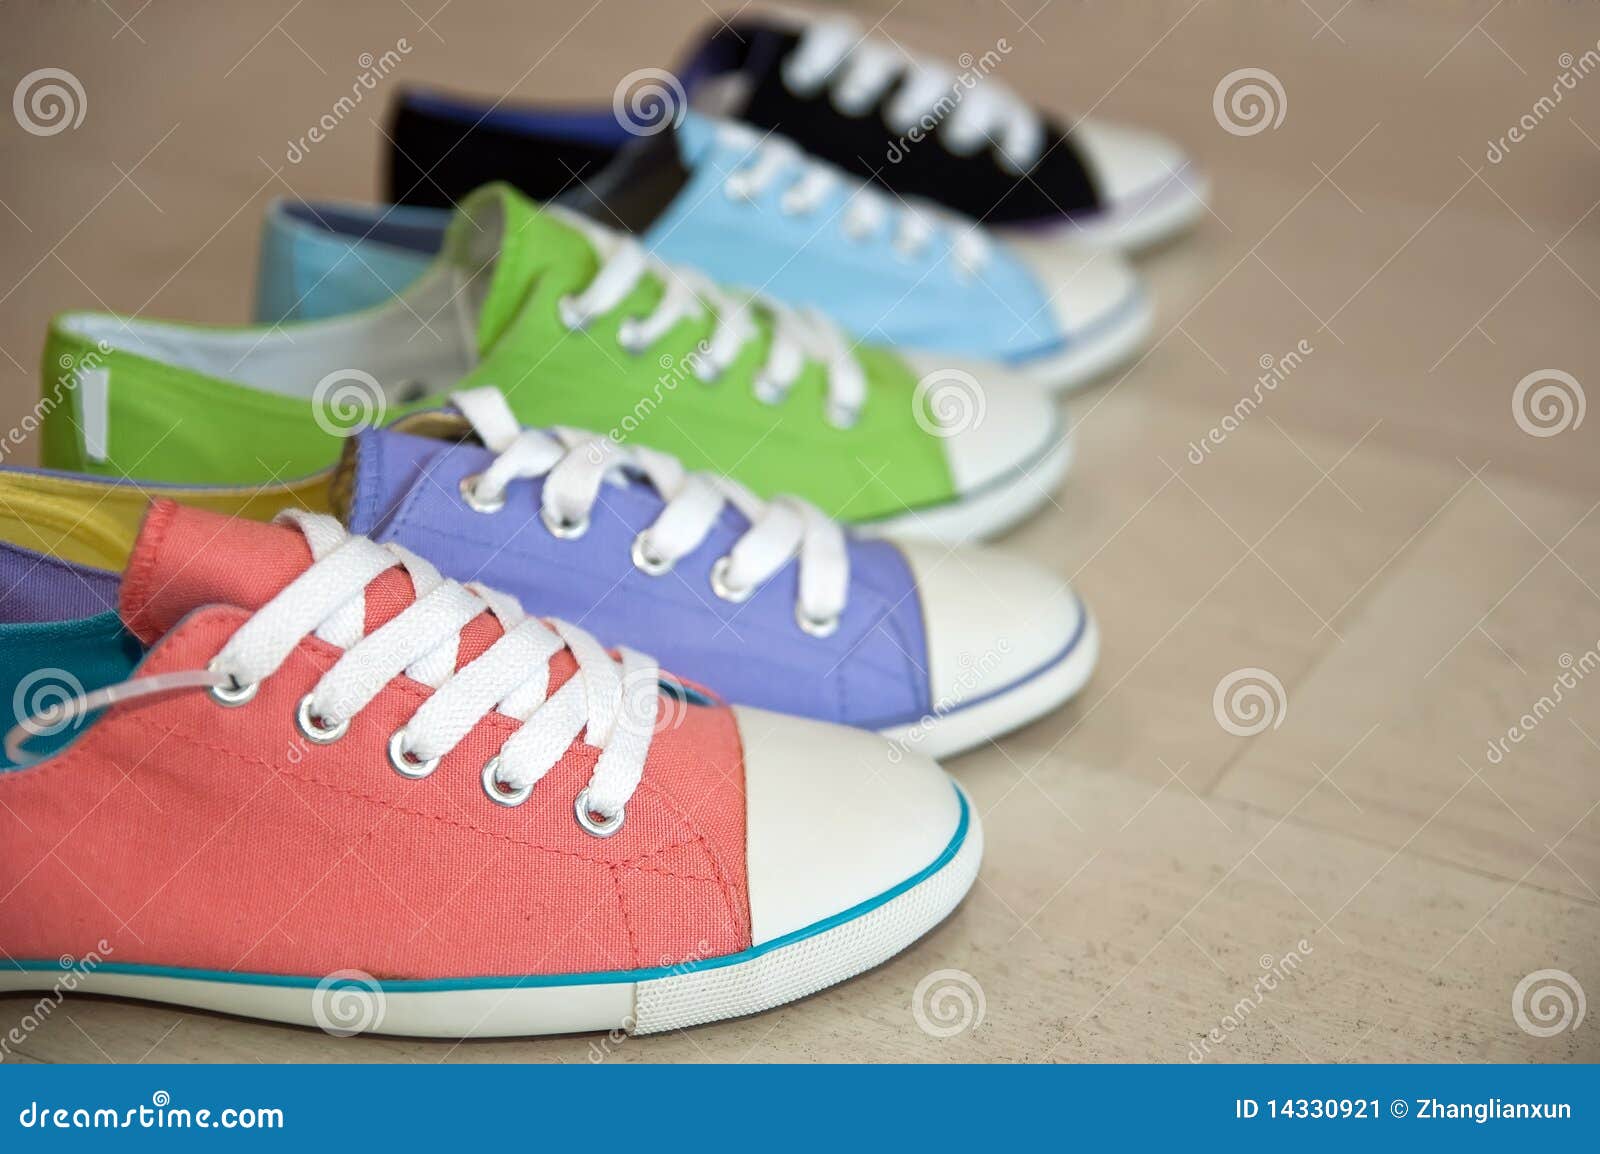 Five Different Color Shoes Stock Image Image 14330921 Effy Moom Free Coloring Picture wallpaper give a chance to color on the wall without getting in trouble! Fill the walls of your home or office with stress-relieving [effymoom.blogspot.com]